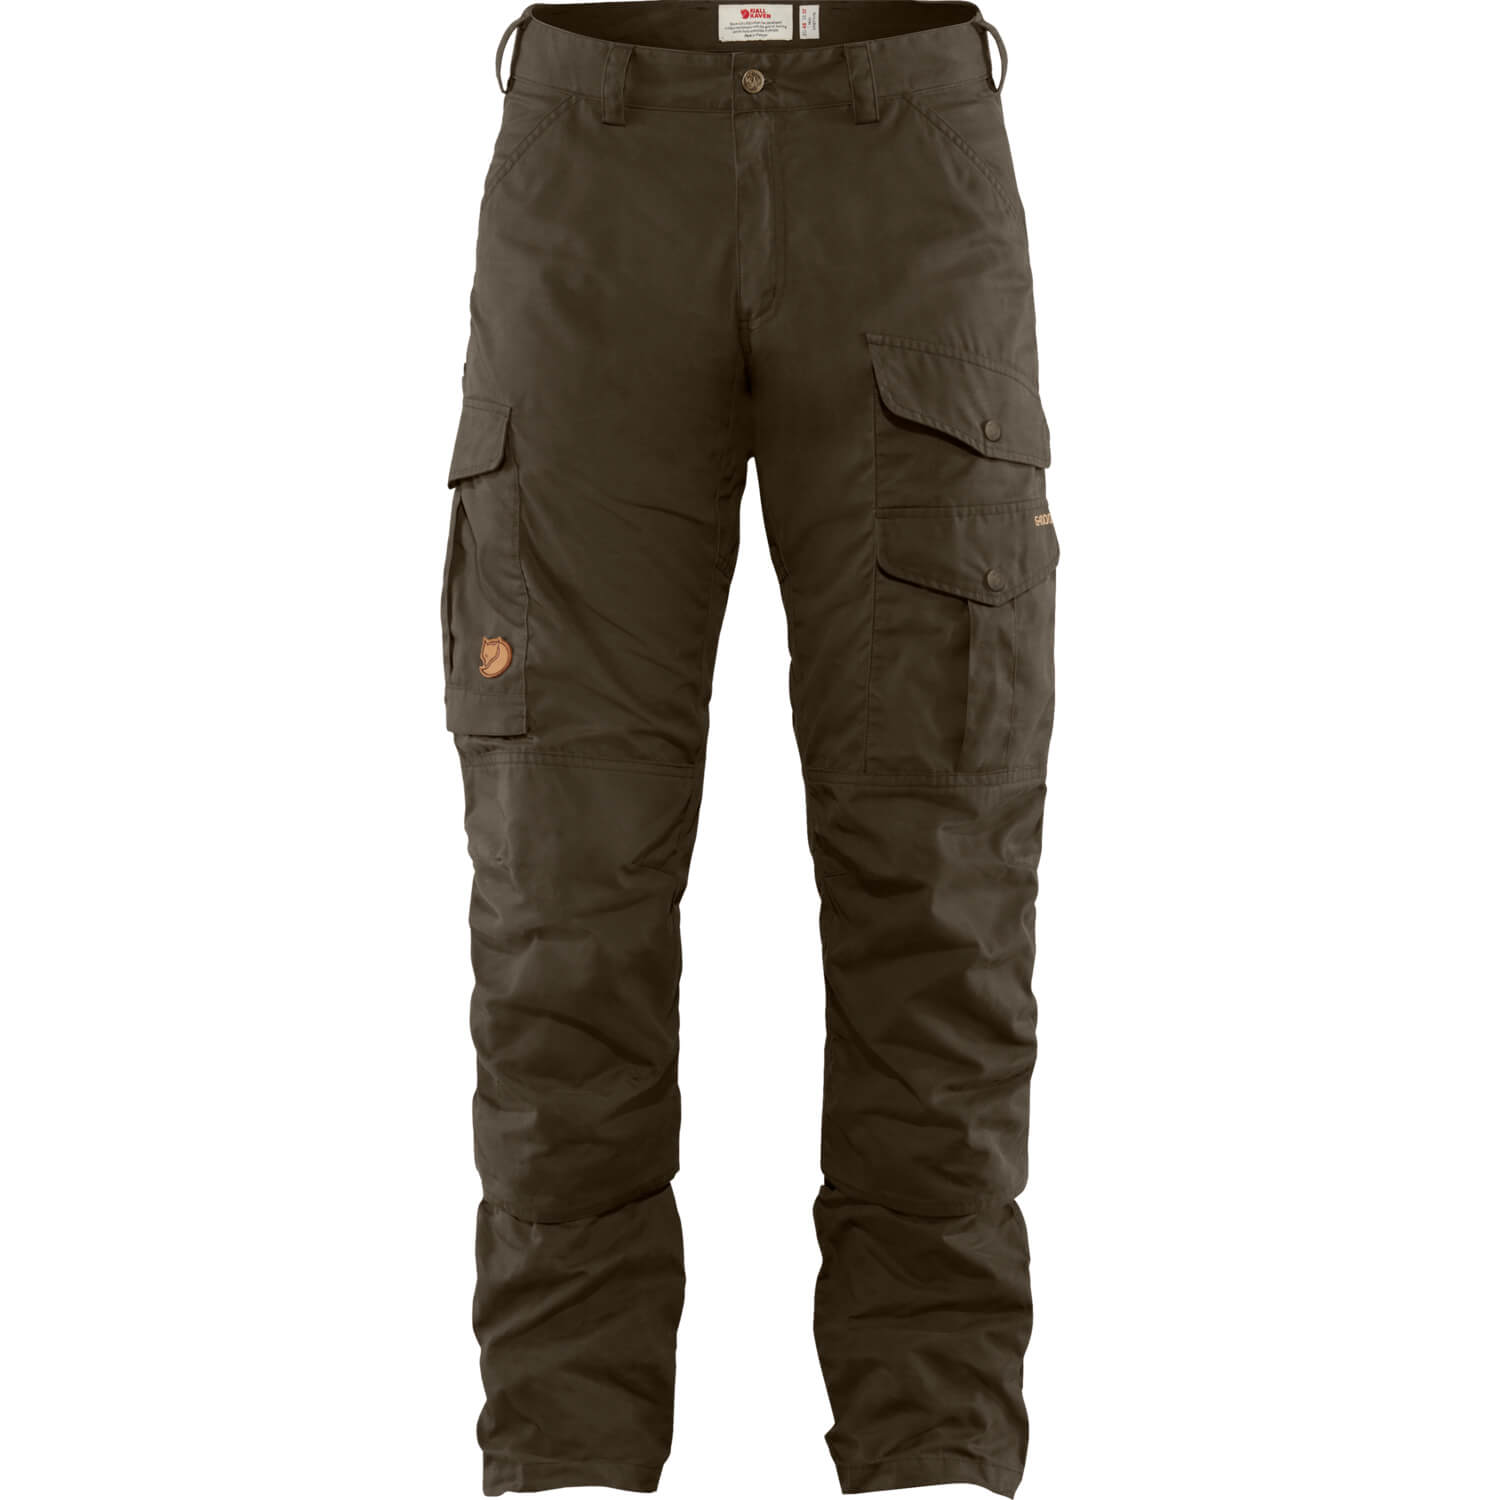 Fjällräven Trousers Barents Pro Hunting (olive) - Hunting Trousers